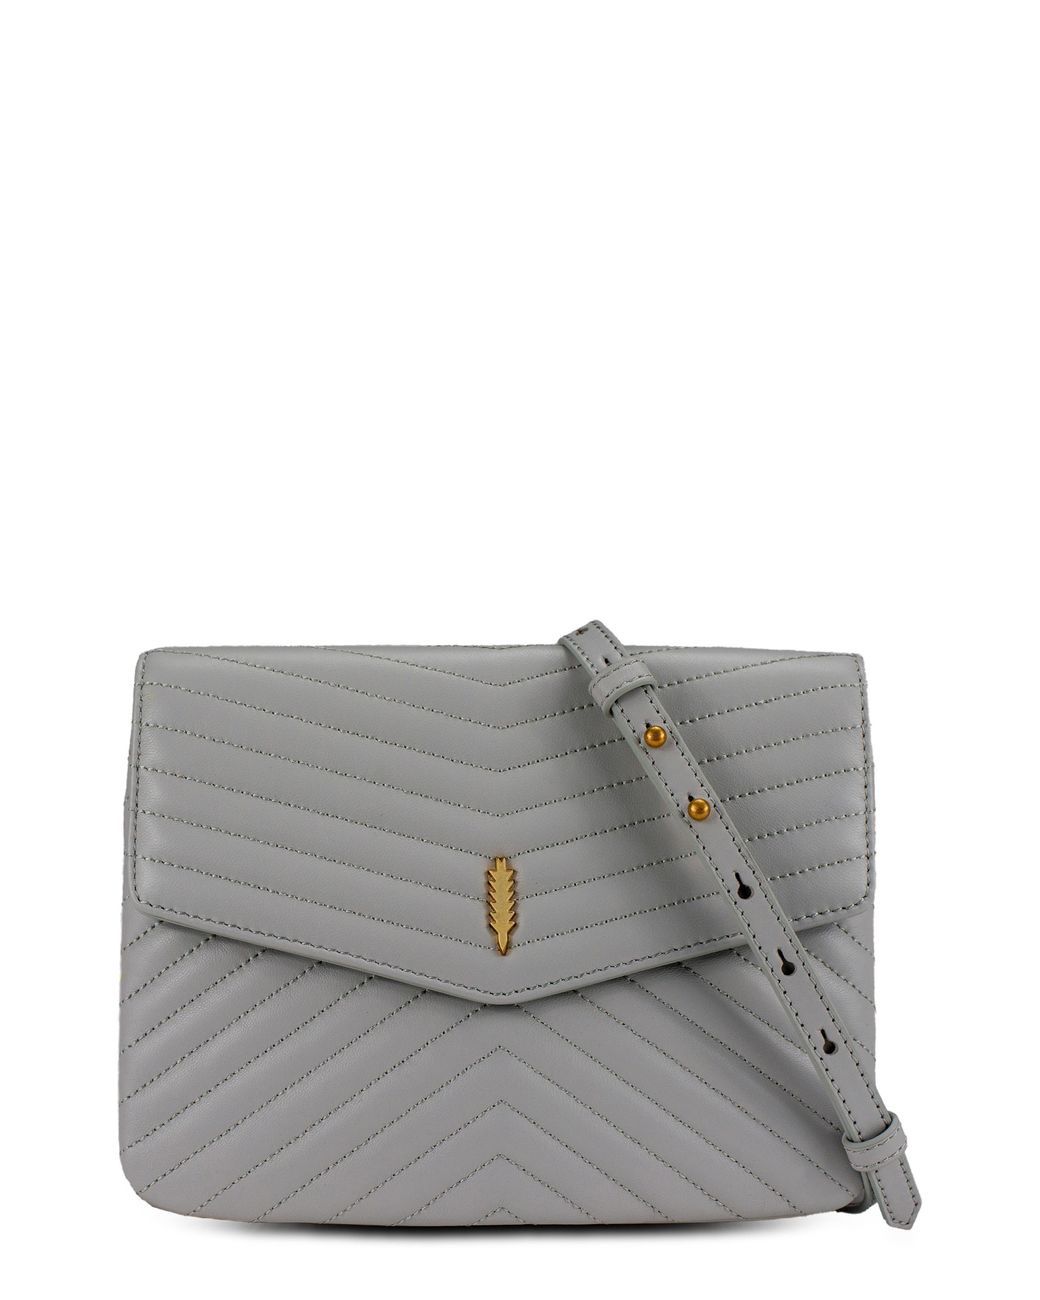 thacker Jenna Quilted Leather Crossbody Bag in Gray | Lyst